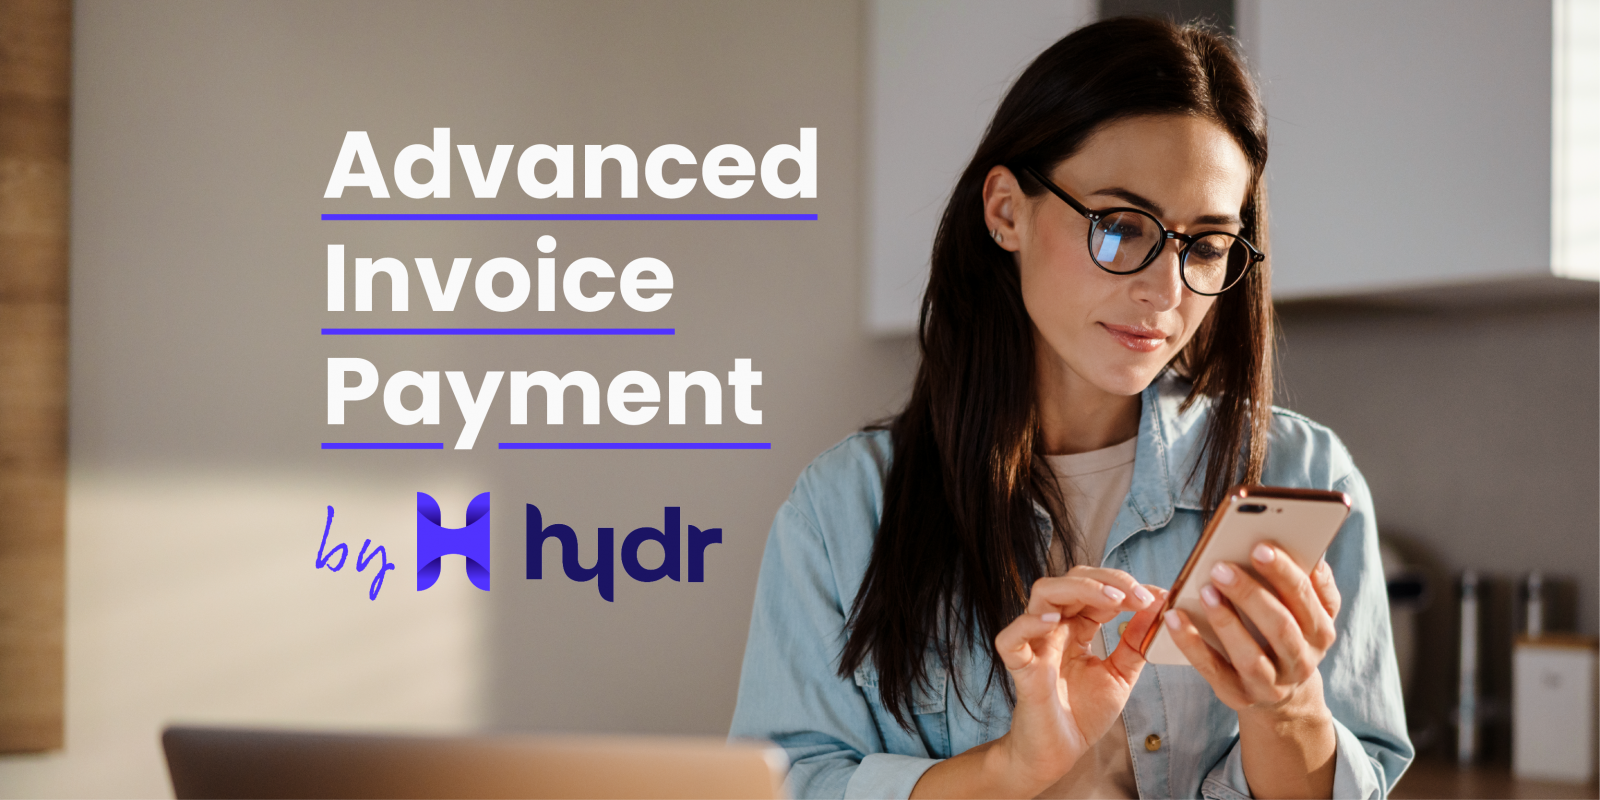 Advanced Invoice Payment with Hydr - Blog